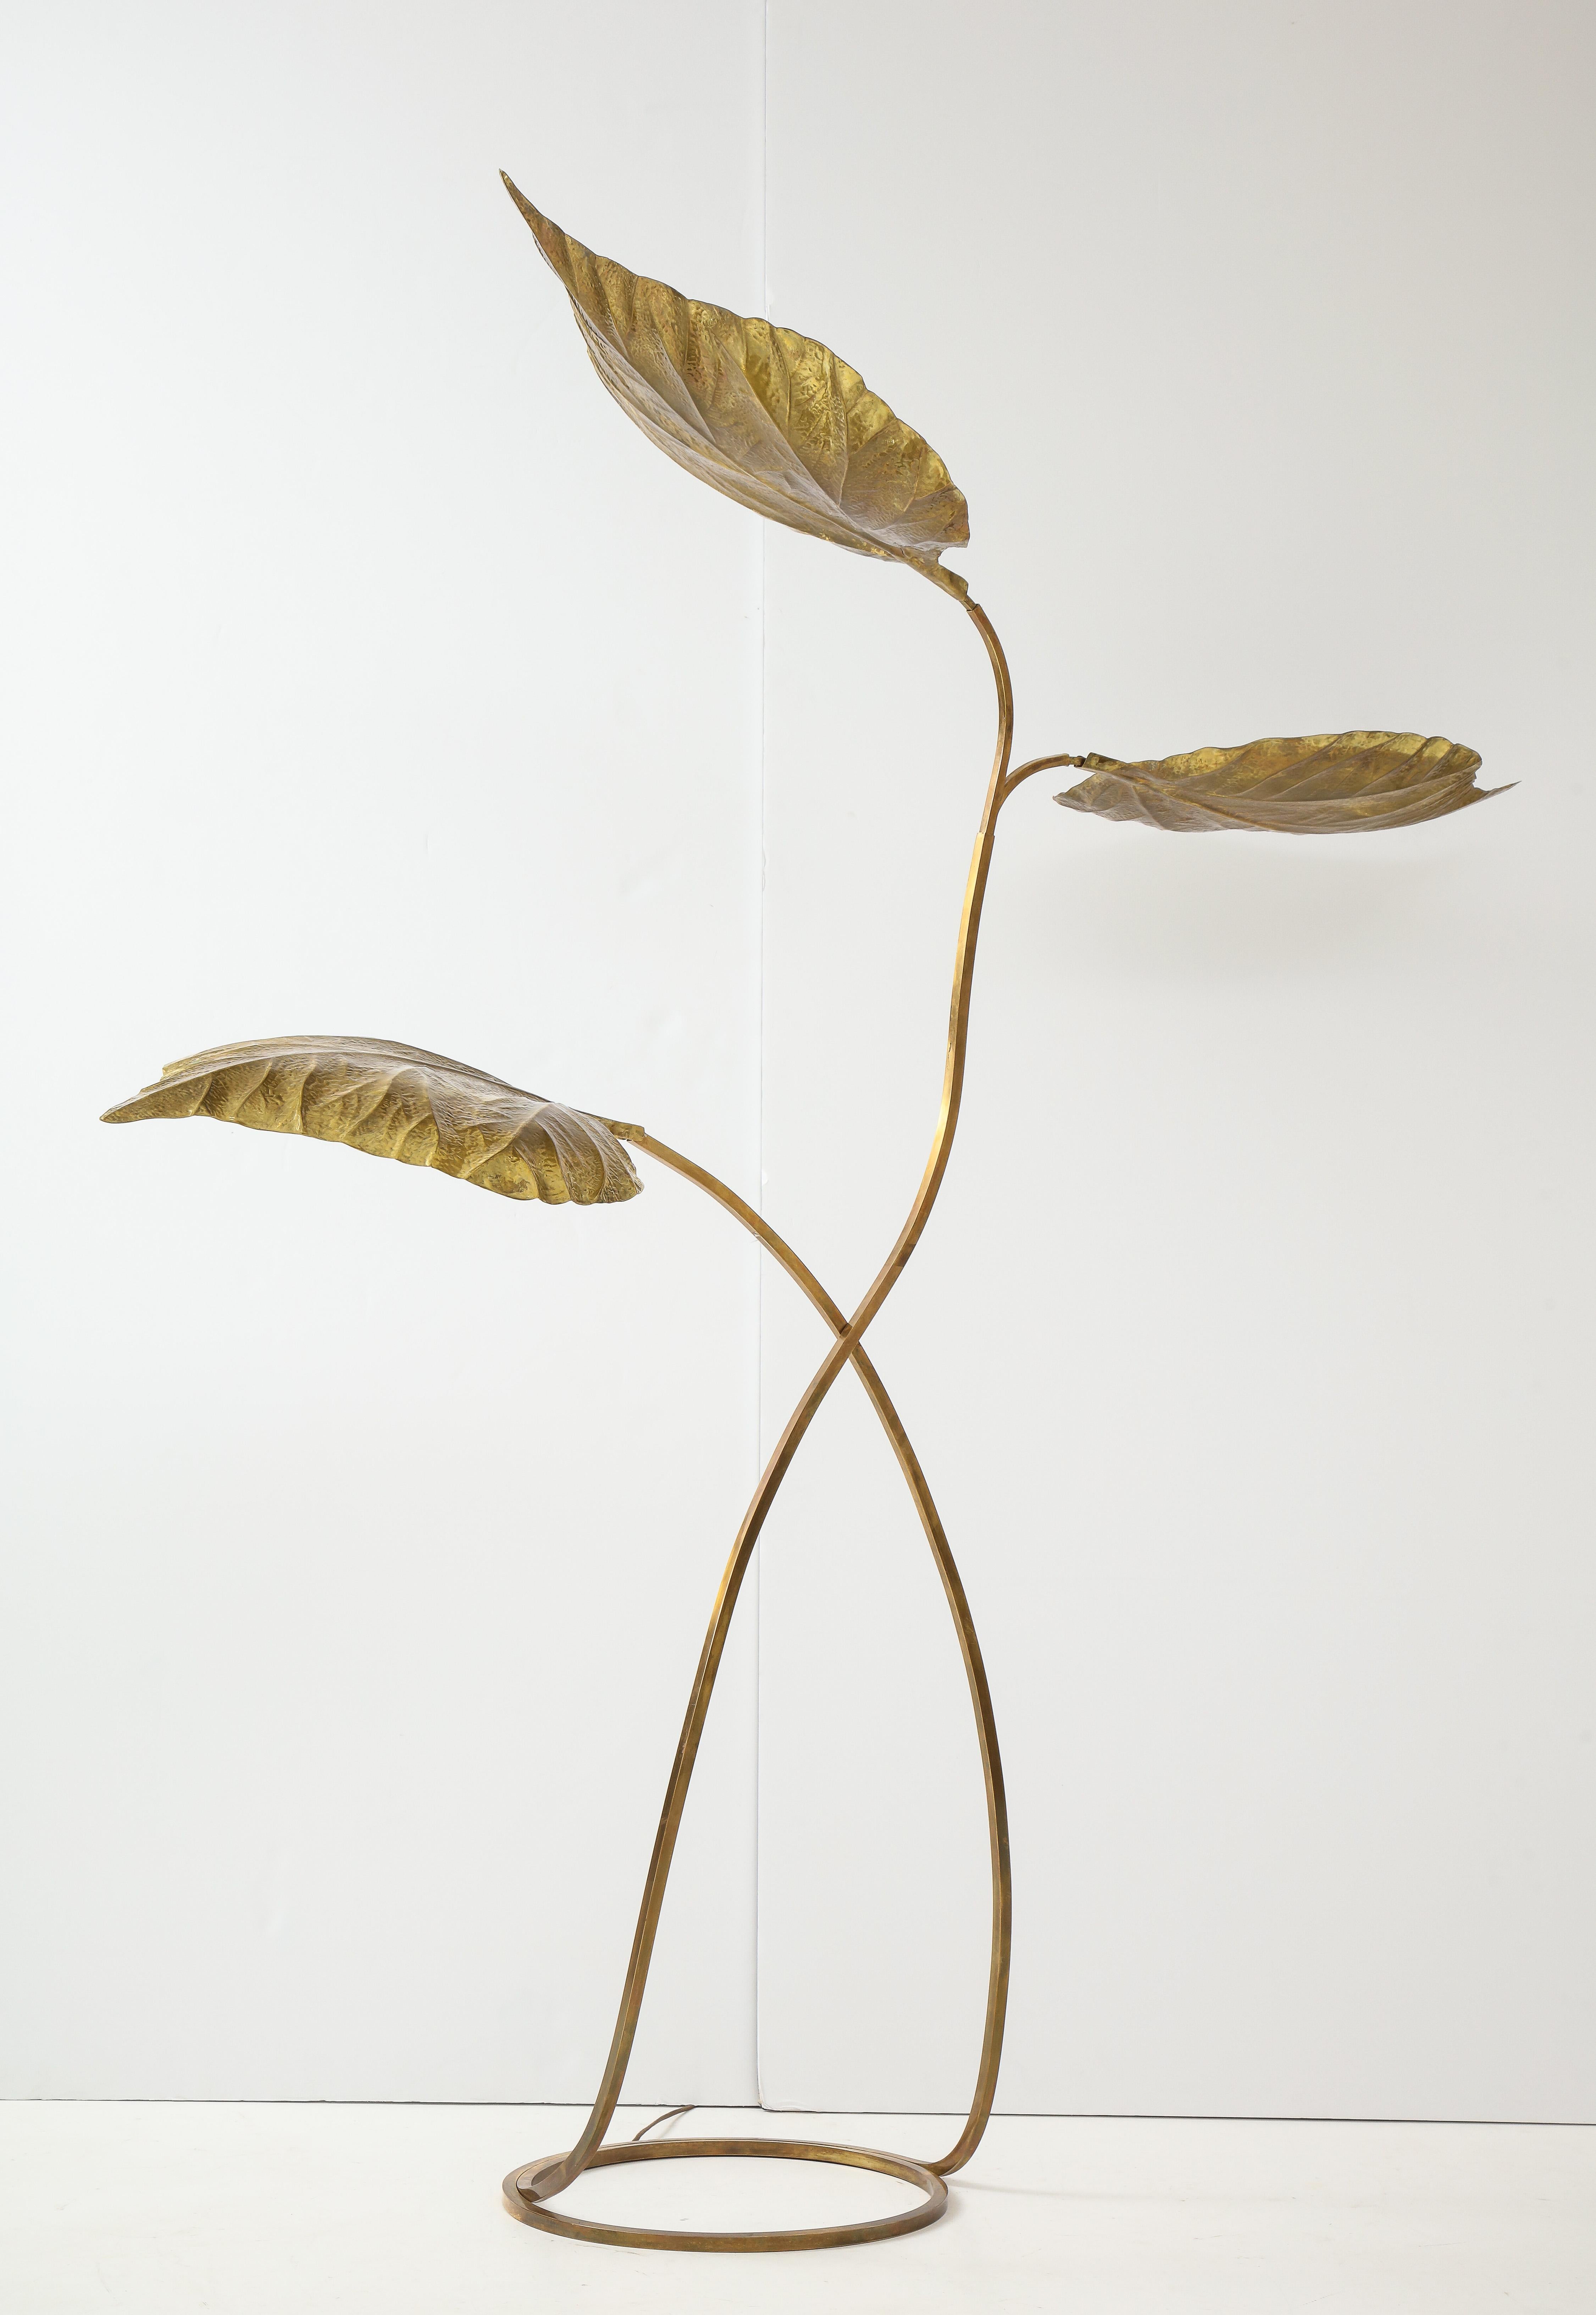 Huge and elegant three-leaf patinated gilt brass 'Rabarbaro' or rhubarb leaf floor lamp with embossed leaves, handmade using repoussé and chasing techniques, mounted on stems ending on circular base, Italy, 1970s. Recently rewired to U.S.